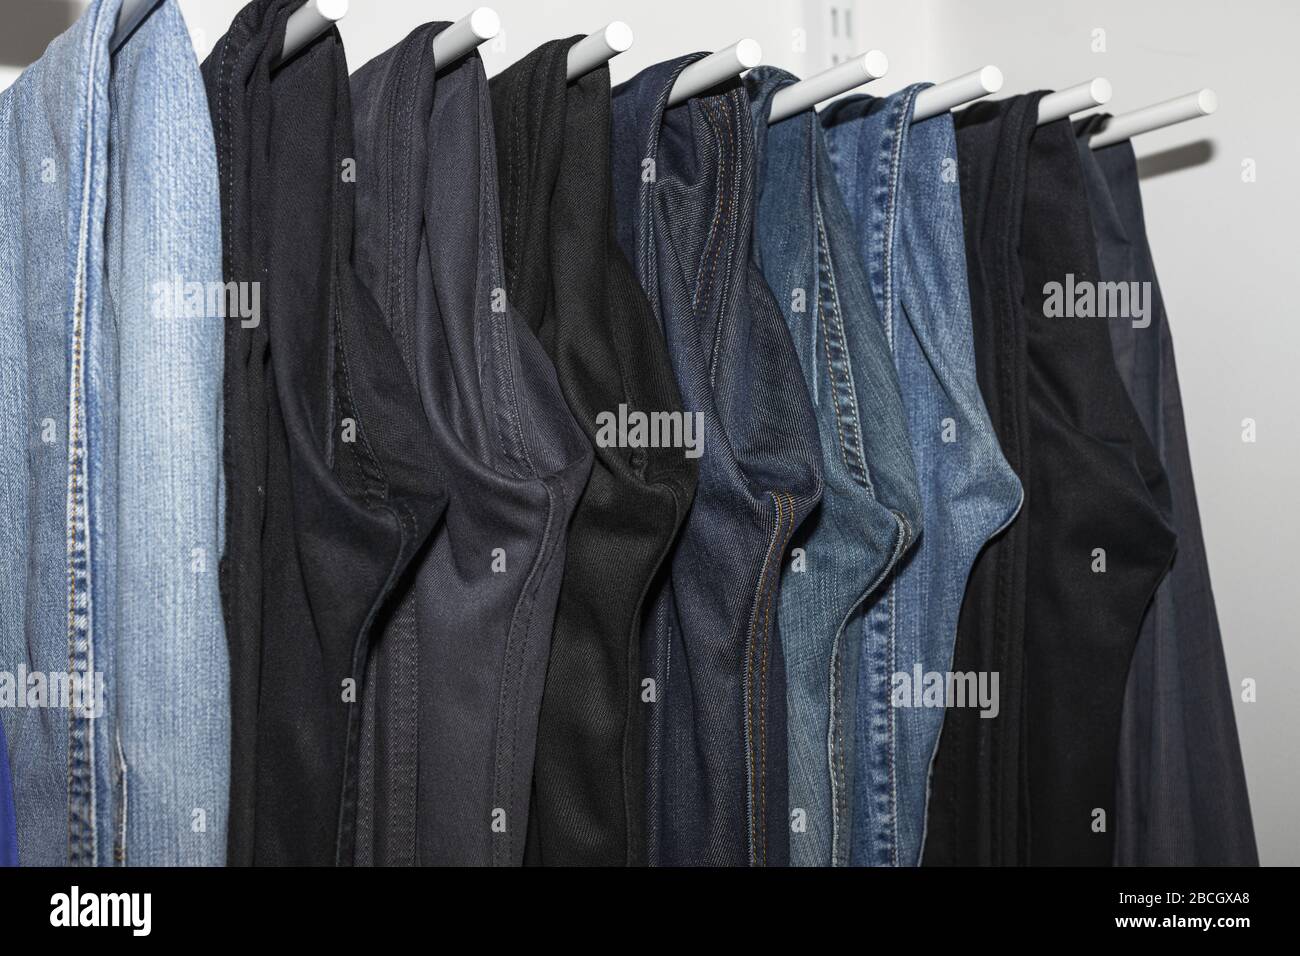 Close up view of interior of built-in wardrobe. Blue and black jeans on white hangers. Cloth organizer. Stock Photo